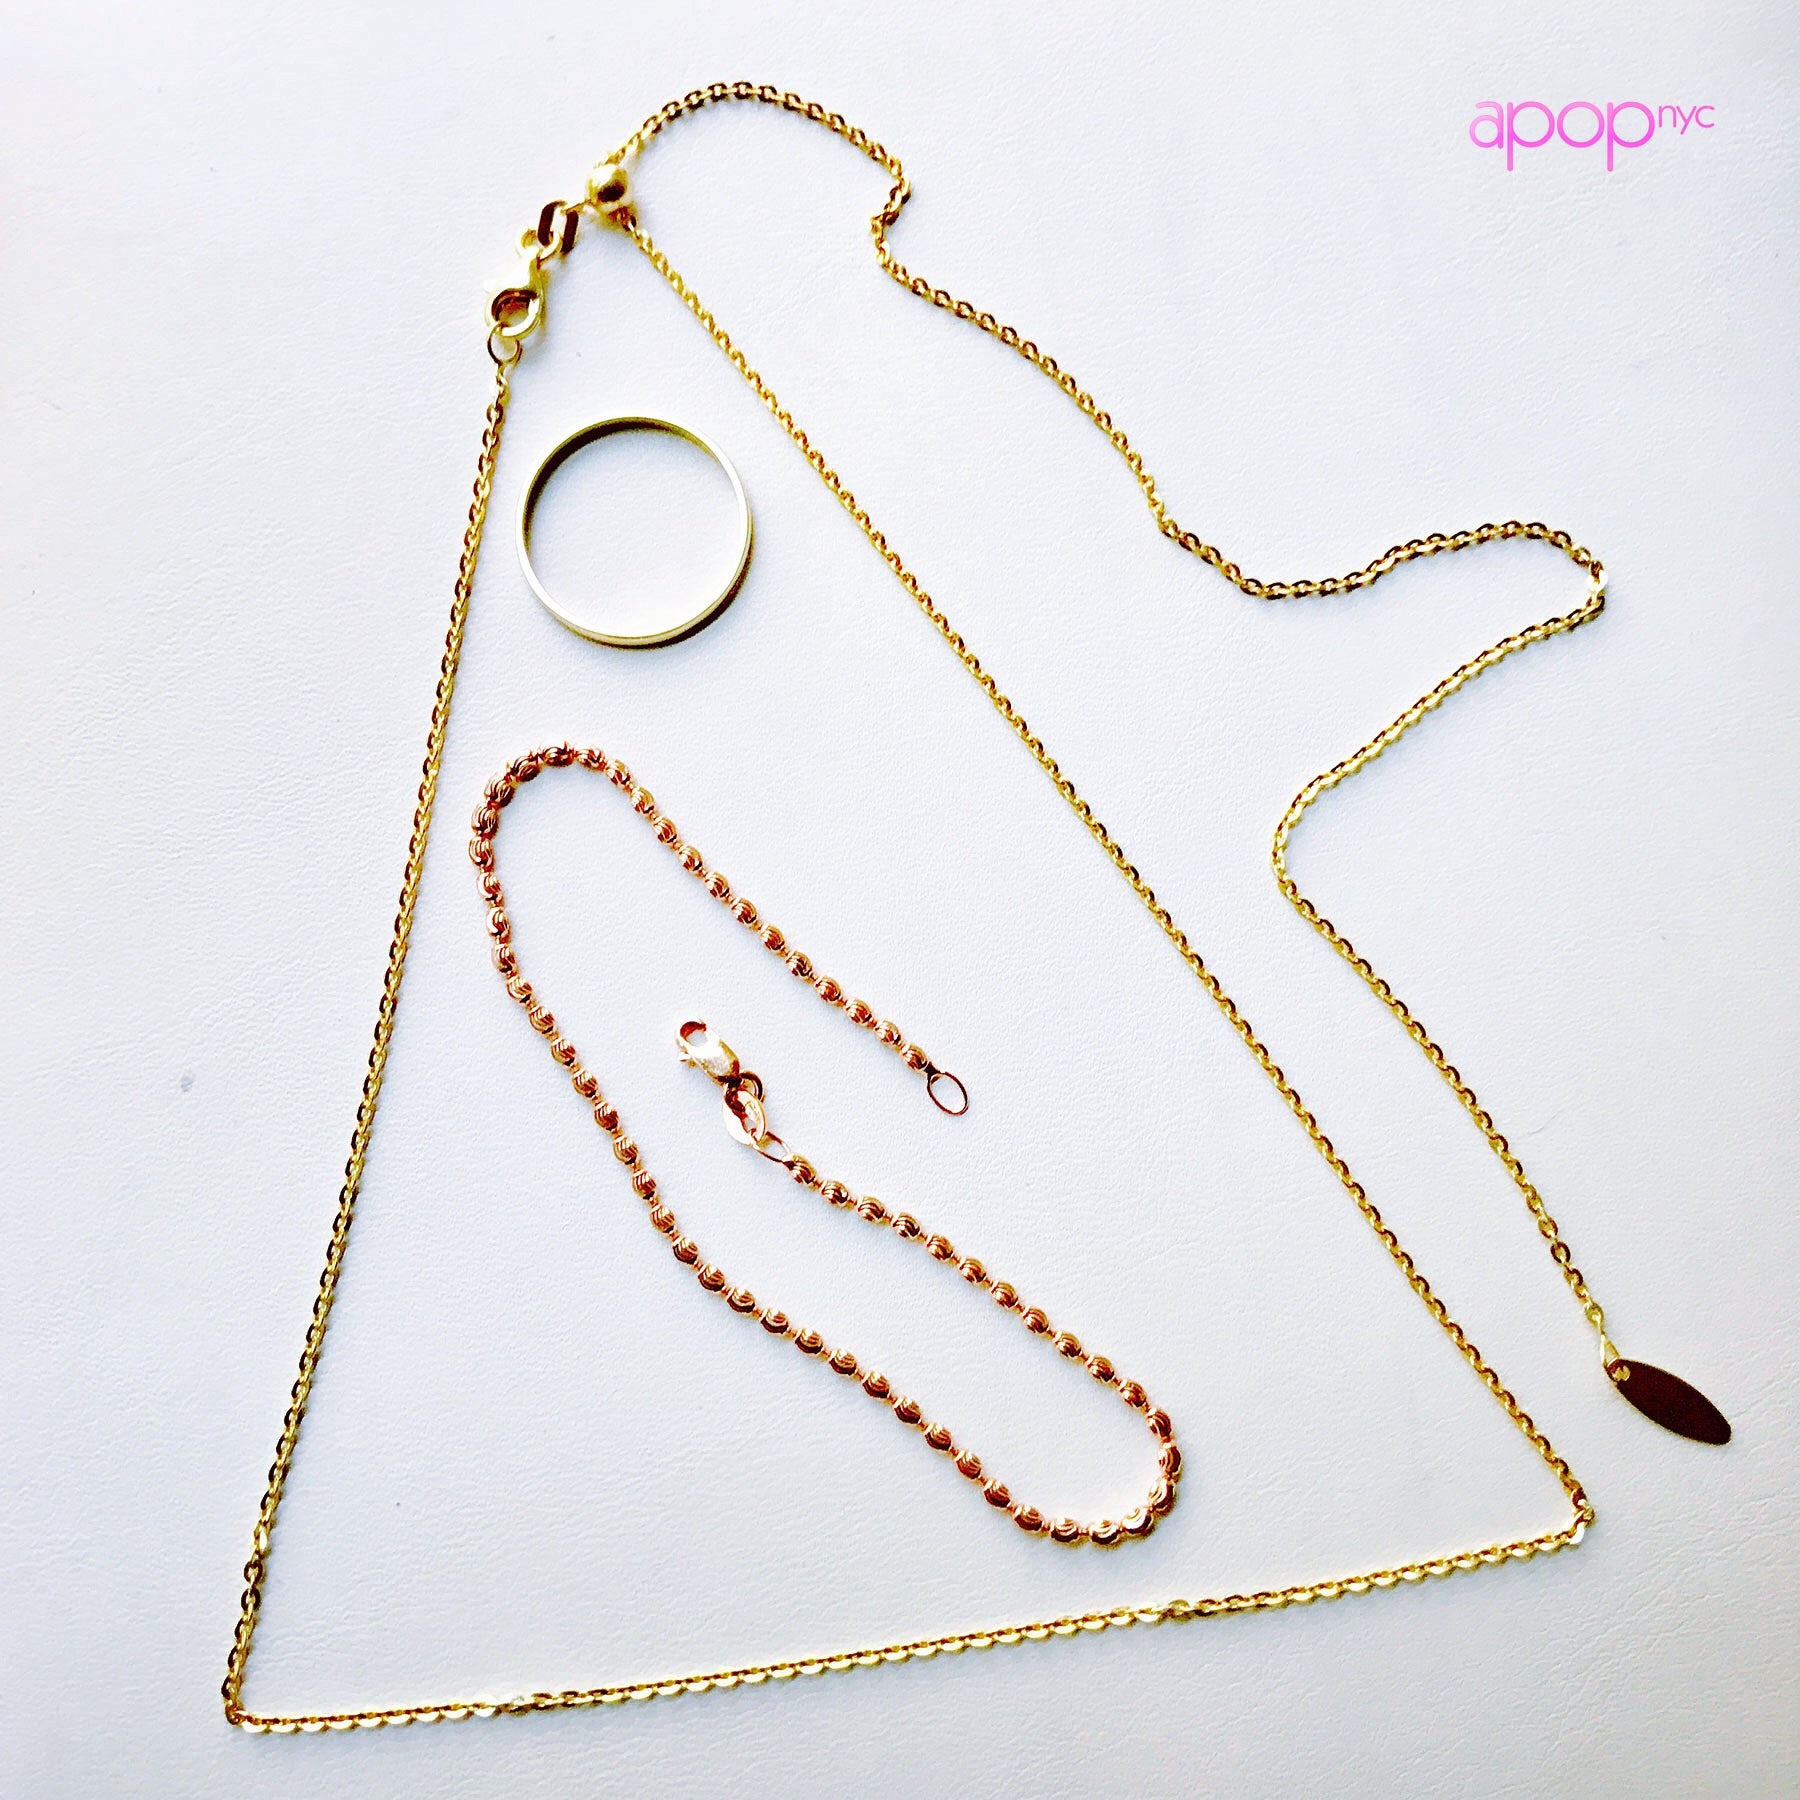 14k Gold Adjustable Bolo Chain Necklace